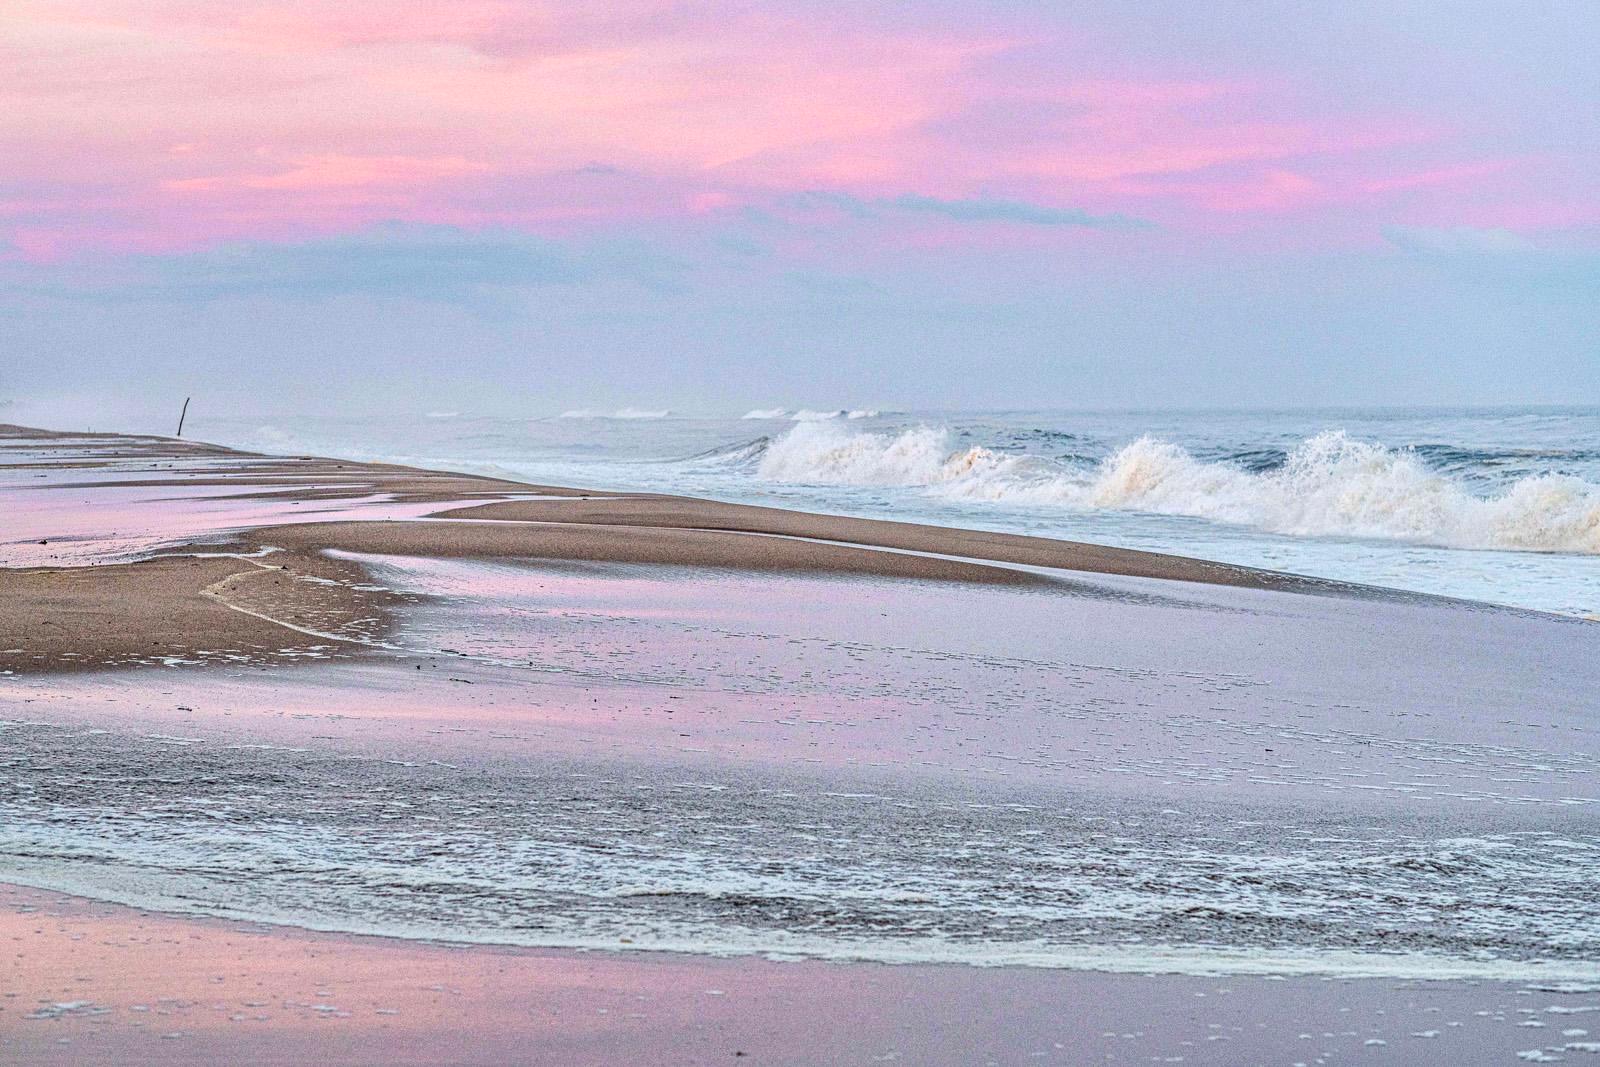 John Mazlish Color Photograph - "Pink Surf"- Colorful Photo Shot on the Beach in Early Autumn Dusk 